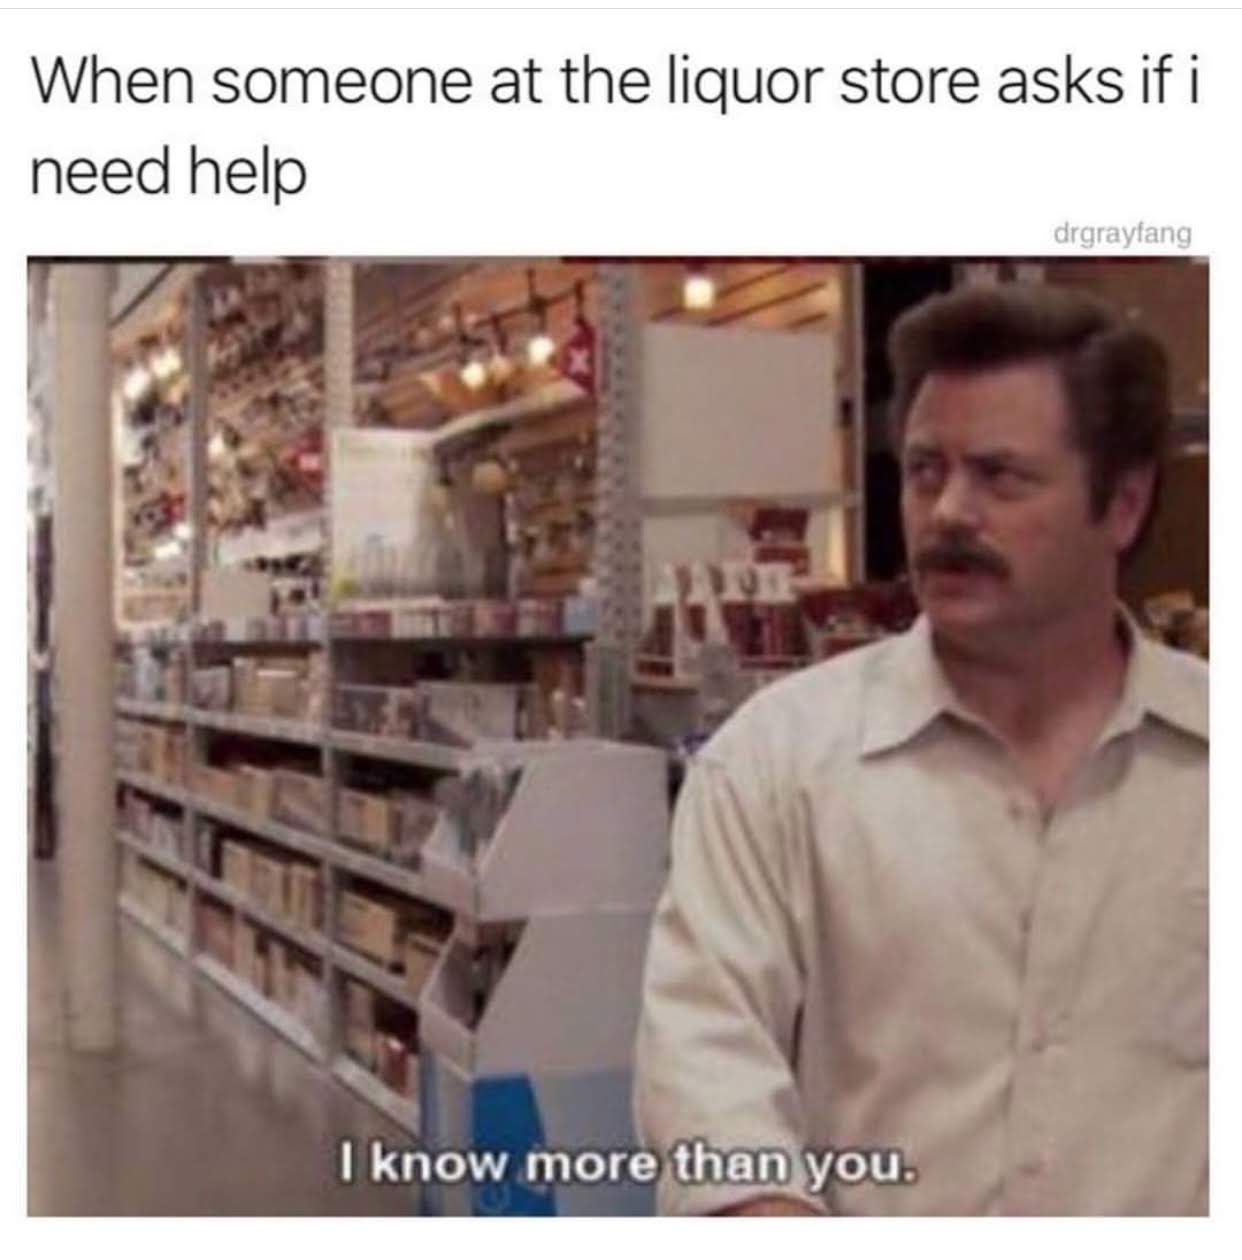 someone at the liquor store asks if - When someone at the liquor store asks if i need help drgrayfang I know more than you.